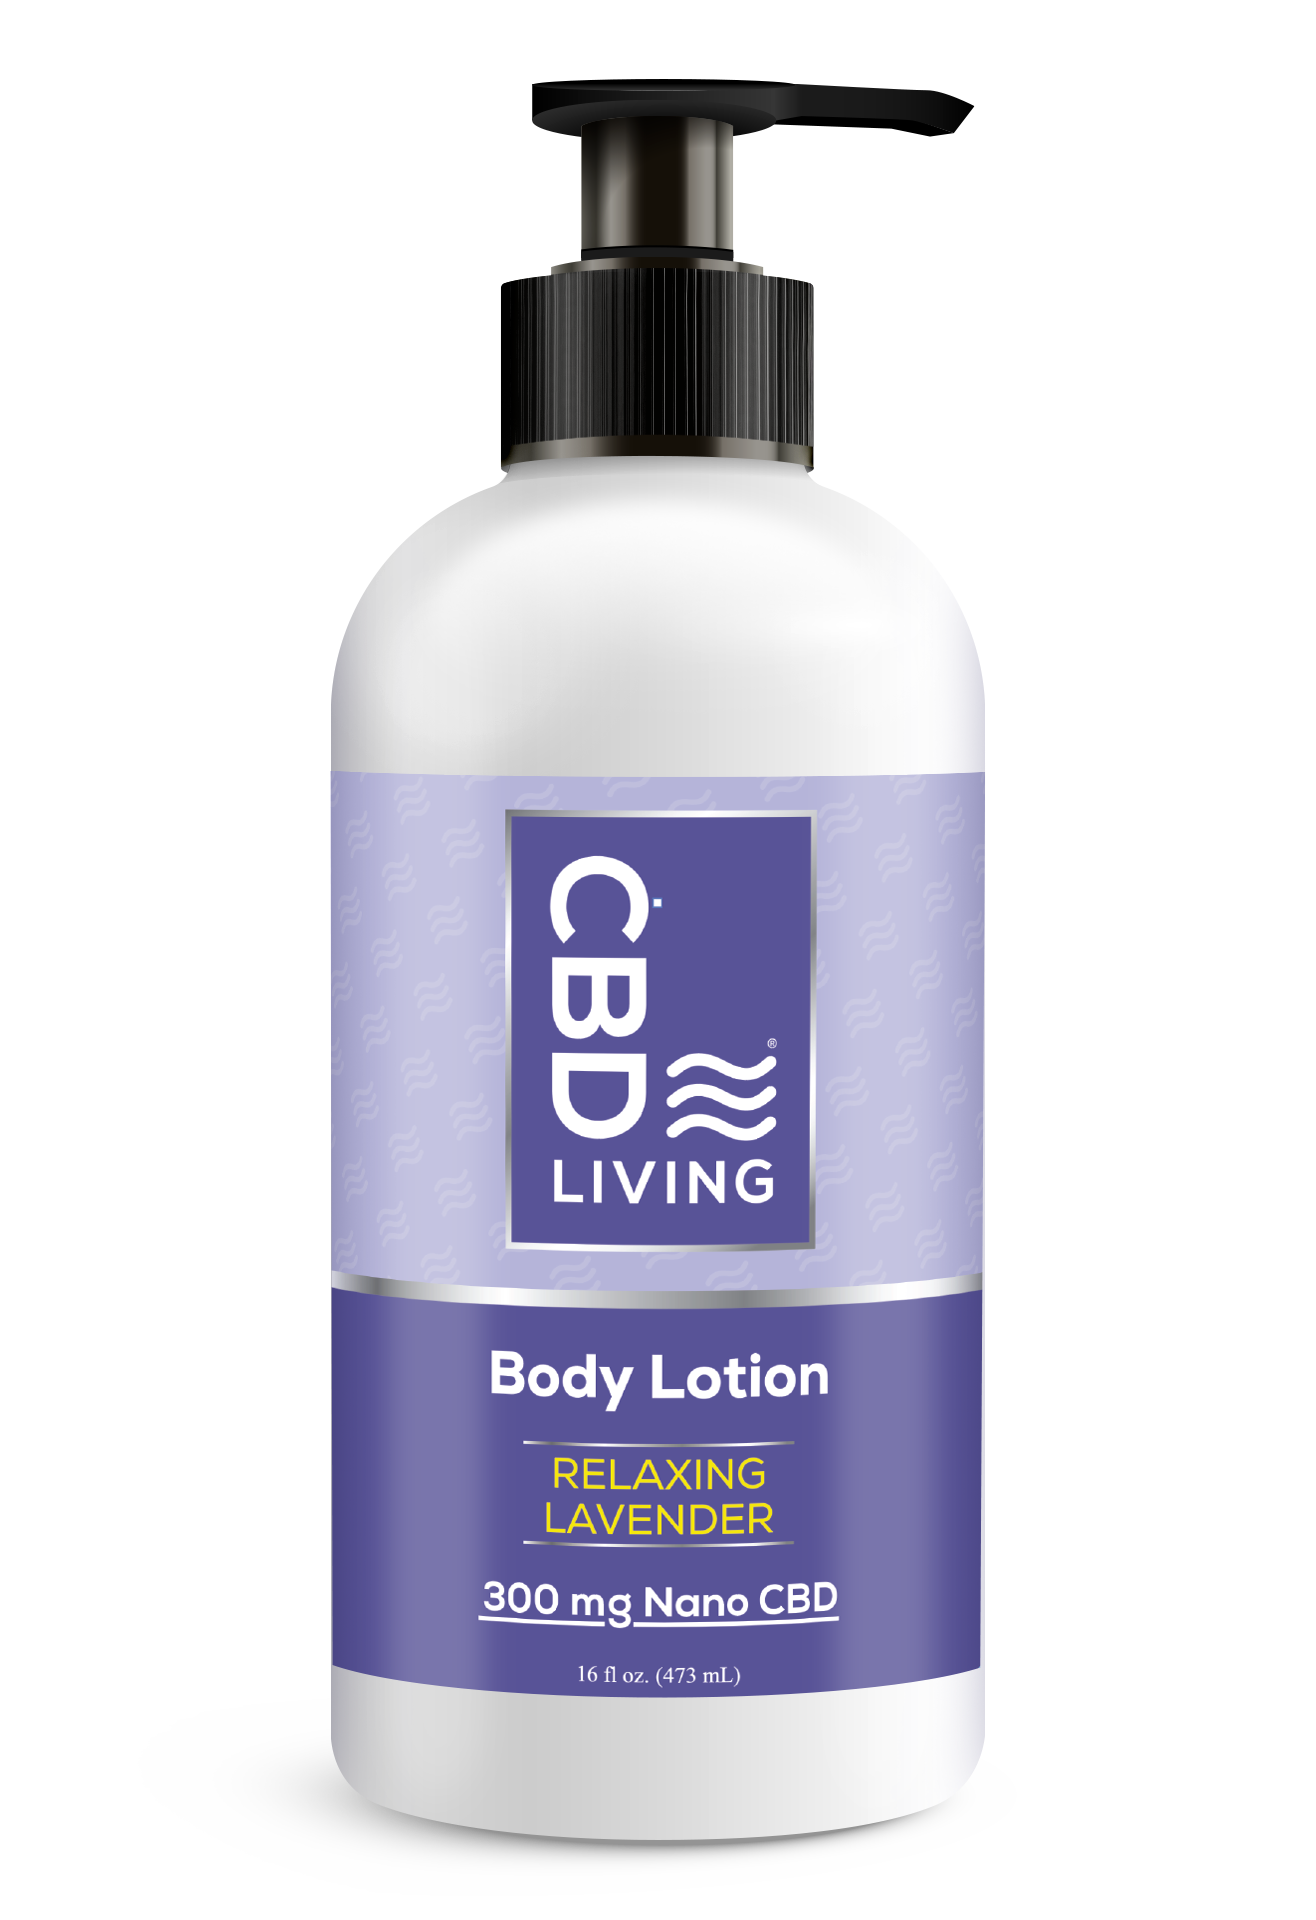 Soothing lavender is mixed with Jasmine, Clove, Lemon and Ylang-Ylang and is perfect for relaxing and unwinding before bed.  CBD Living’s proprietary Skin Retention Technology allows nutrients to better penetrate the layers of the skin, and stay on the skin longer, for lasting relief.